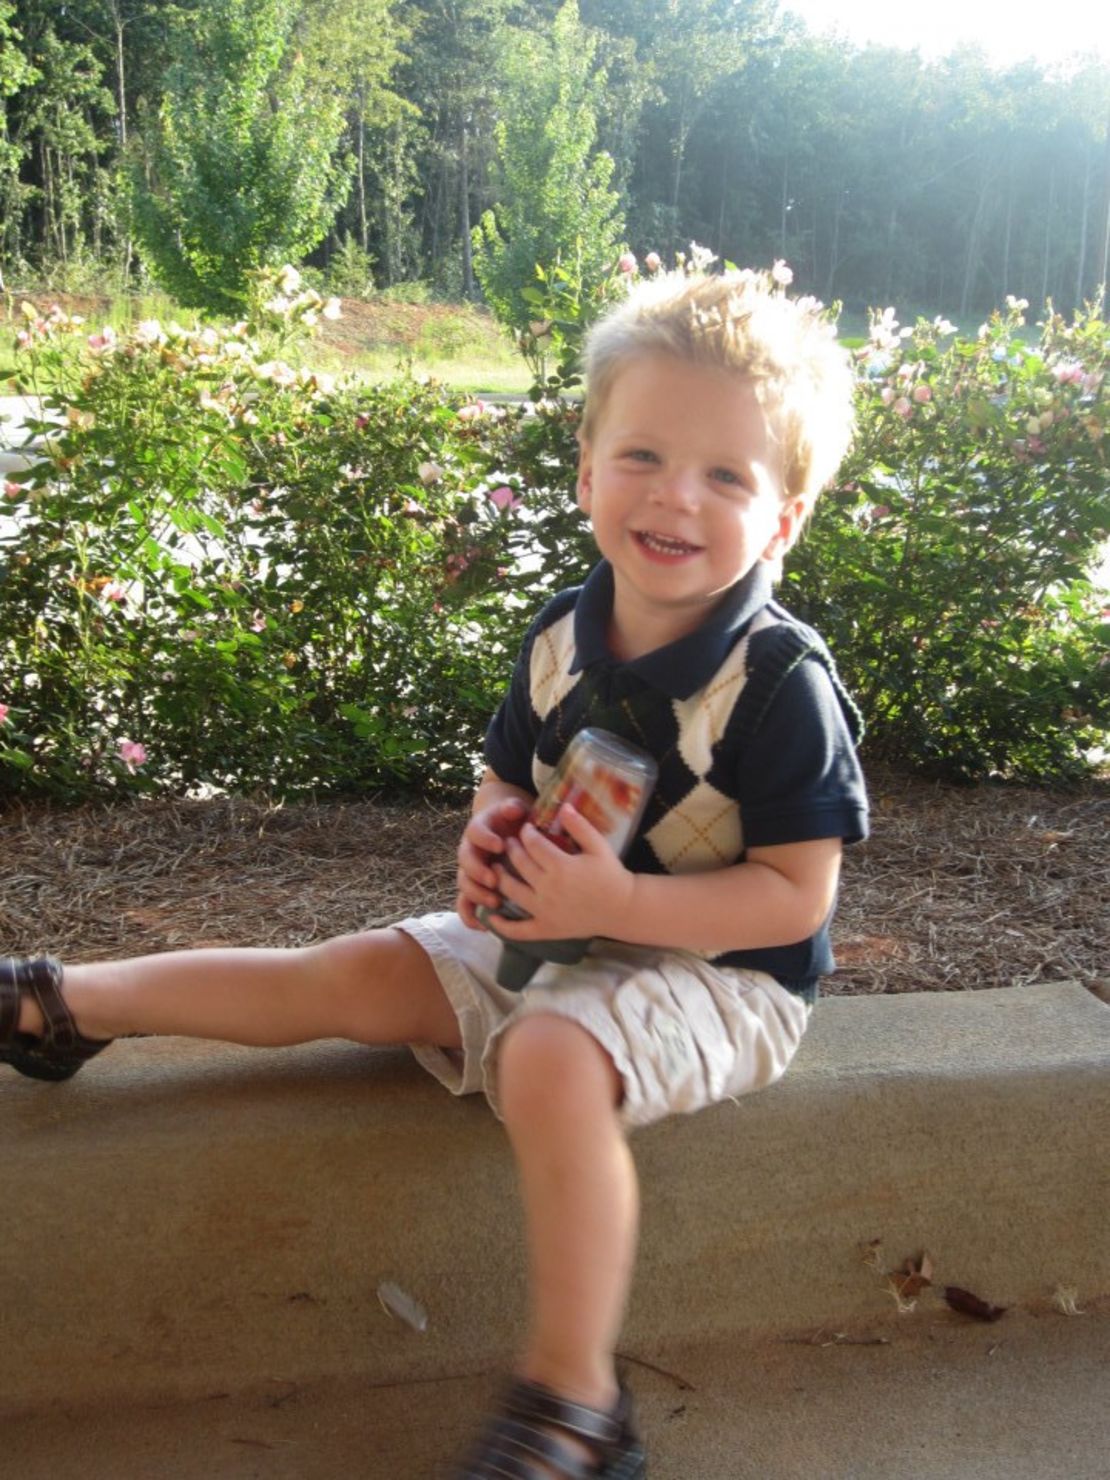 Halstead uses her Facebook page to share photos of Tripp before and after the accident.